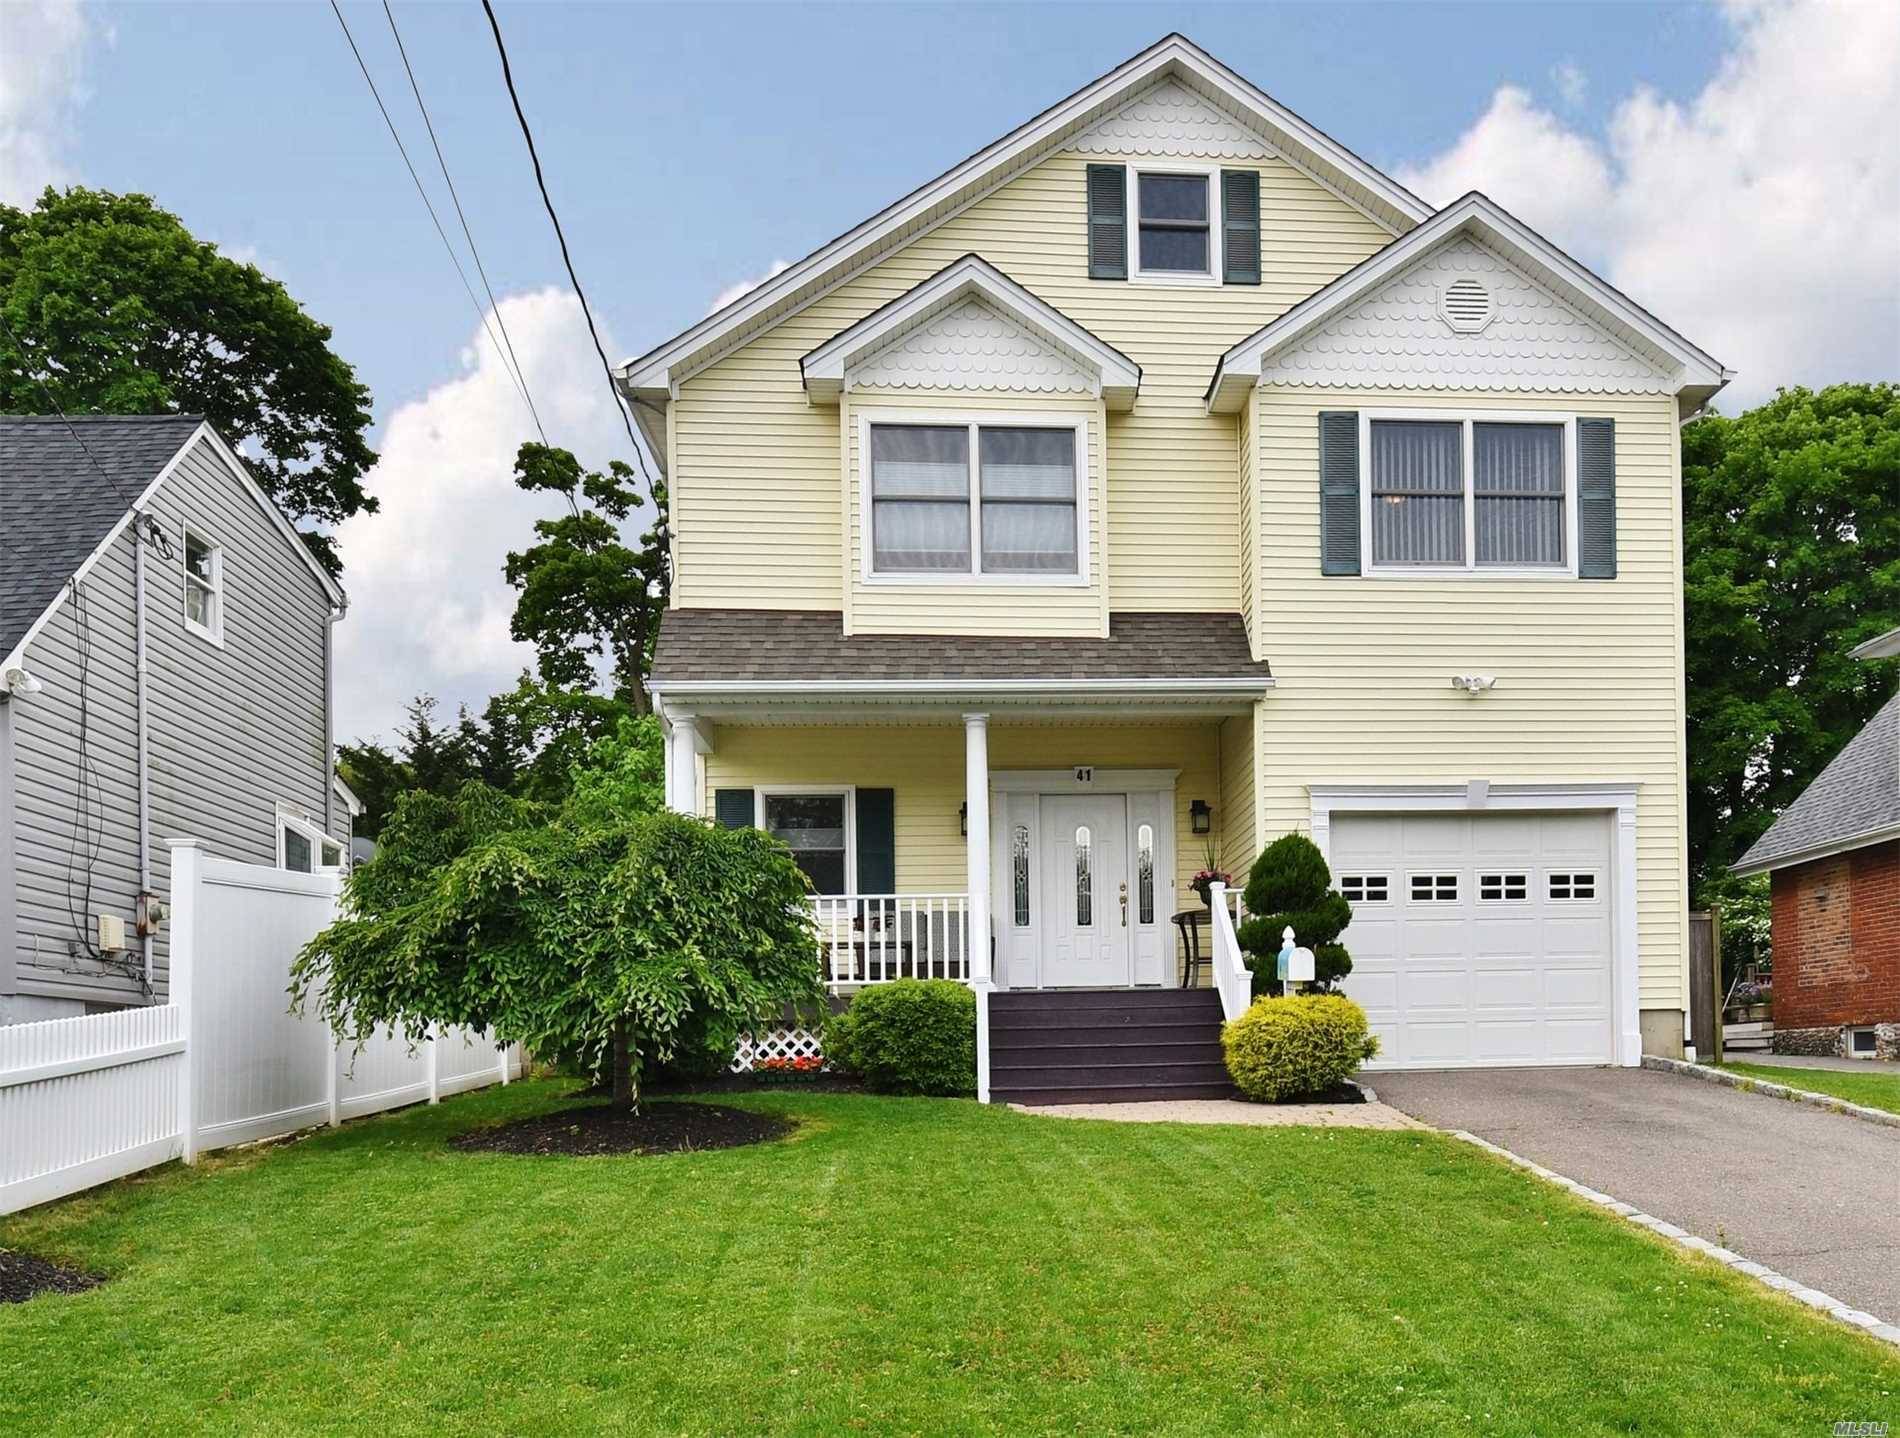 Young 4 BR, 2. 5 Bth Colonial on a private mid block location.